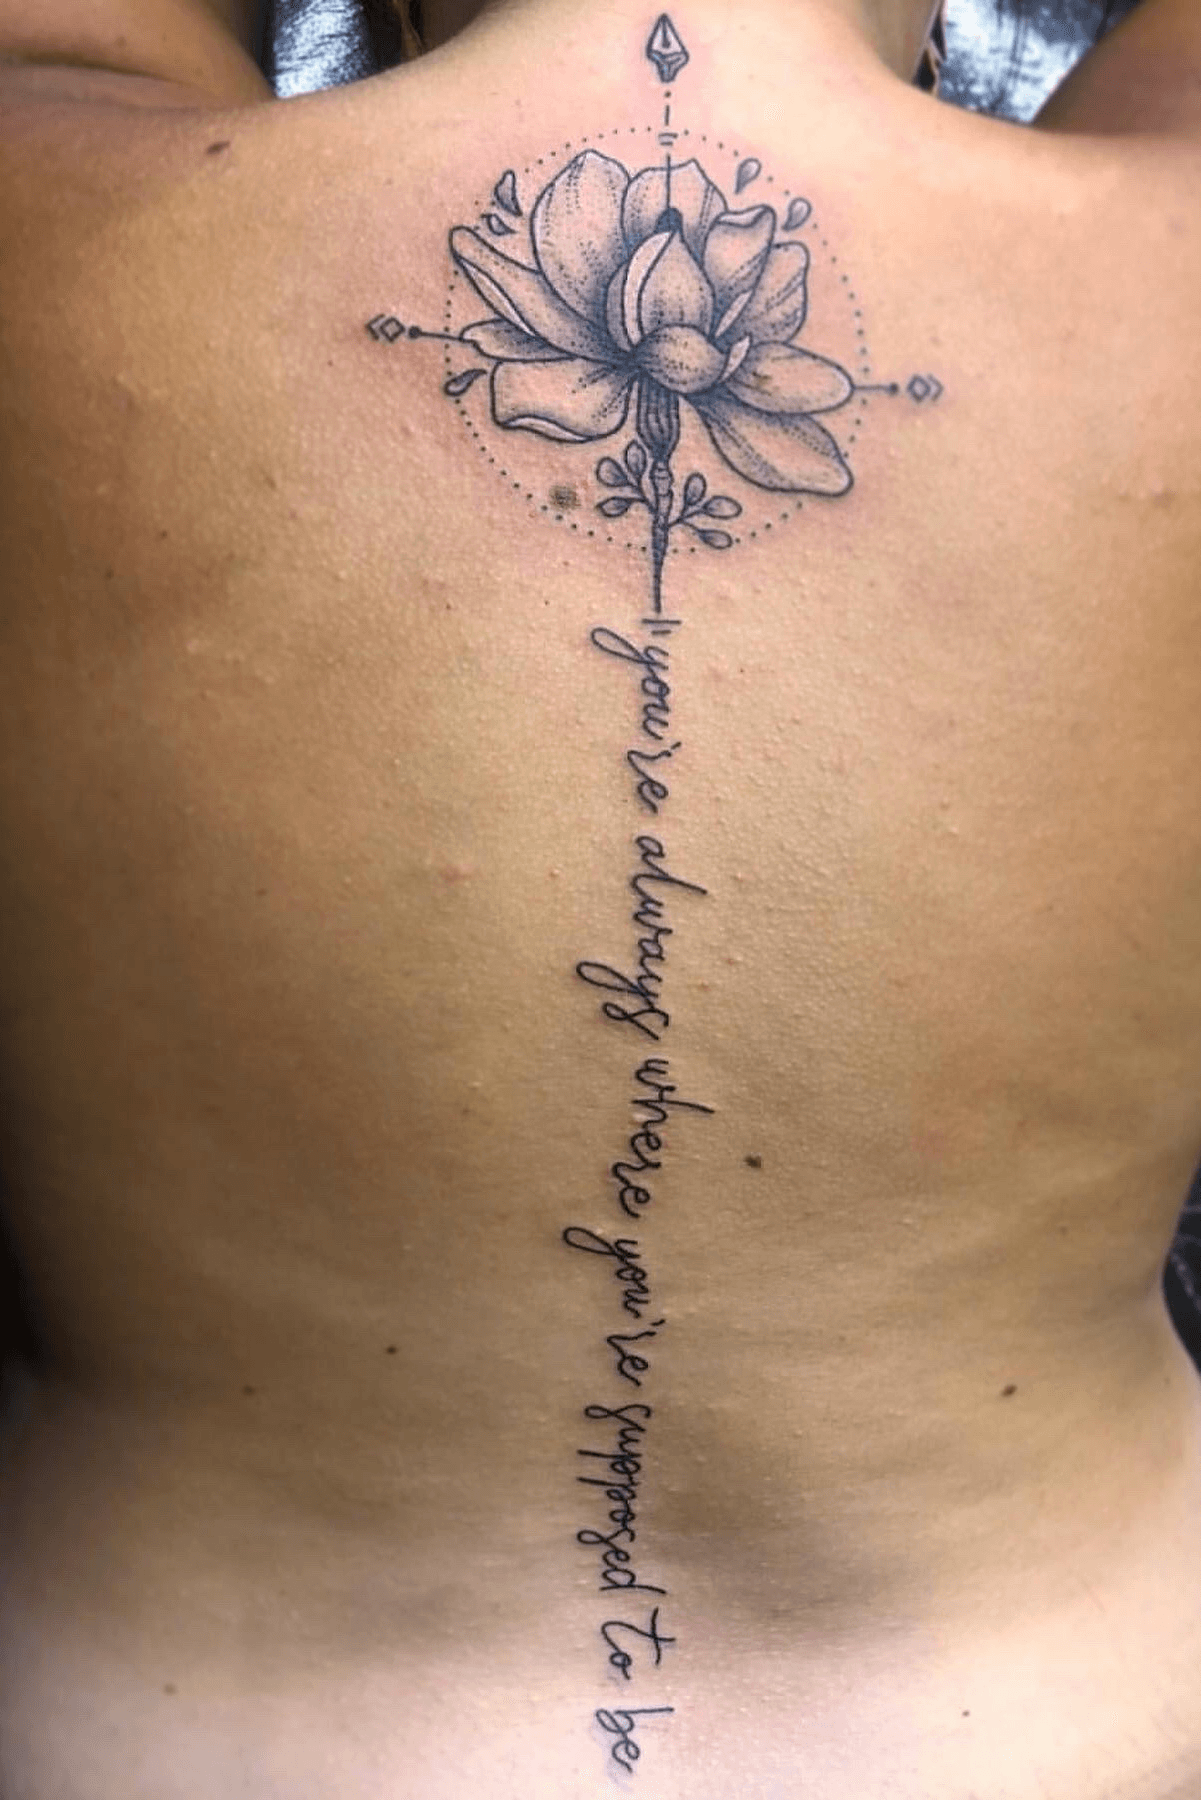 sunflower tattoo with quotesTikTok Search